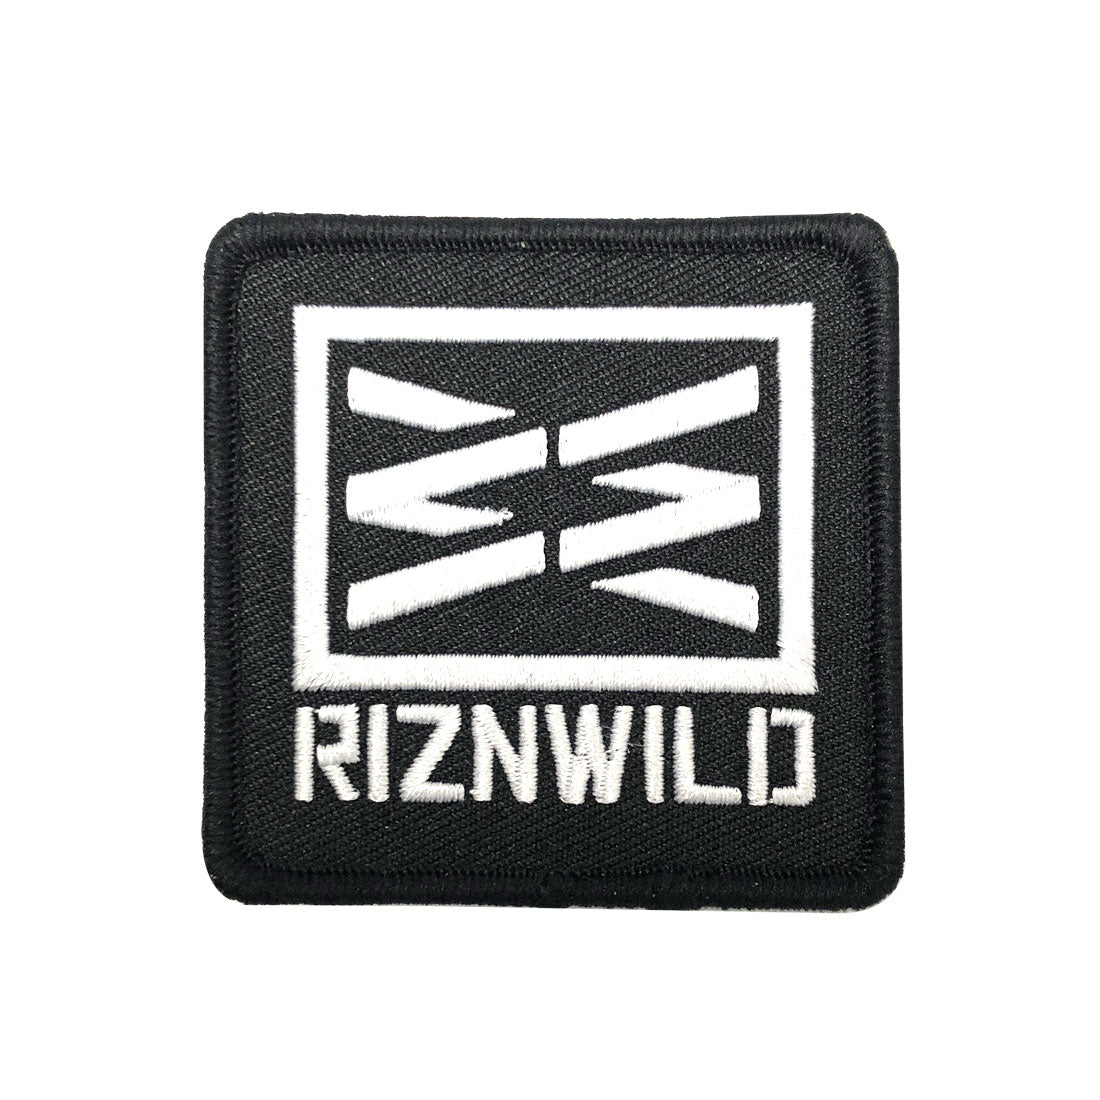 RIZWILD embroidered sew on patch black and white  